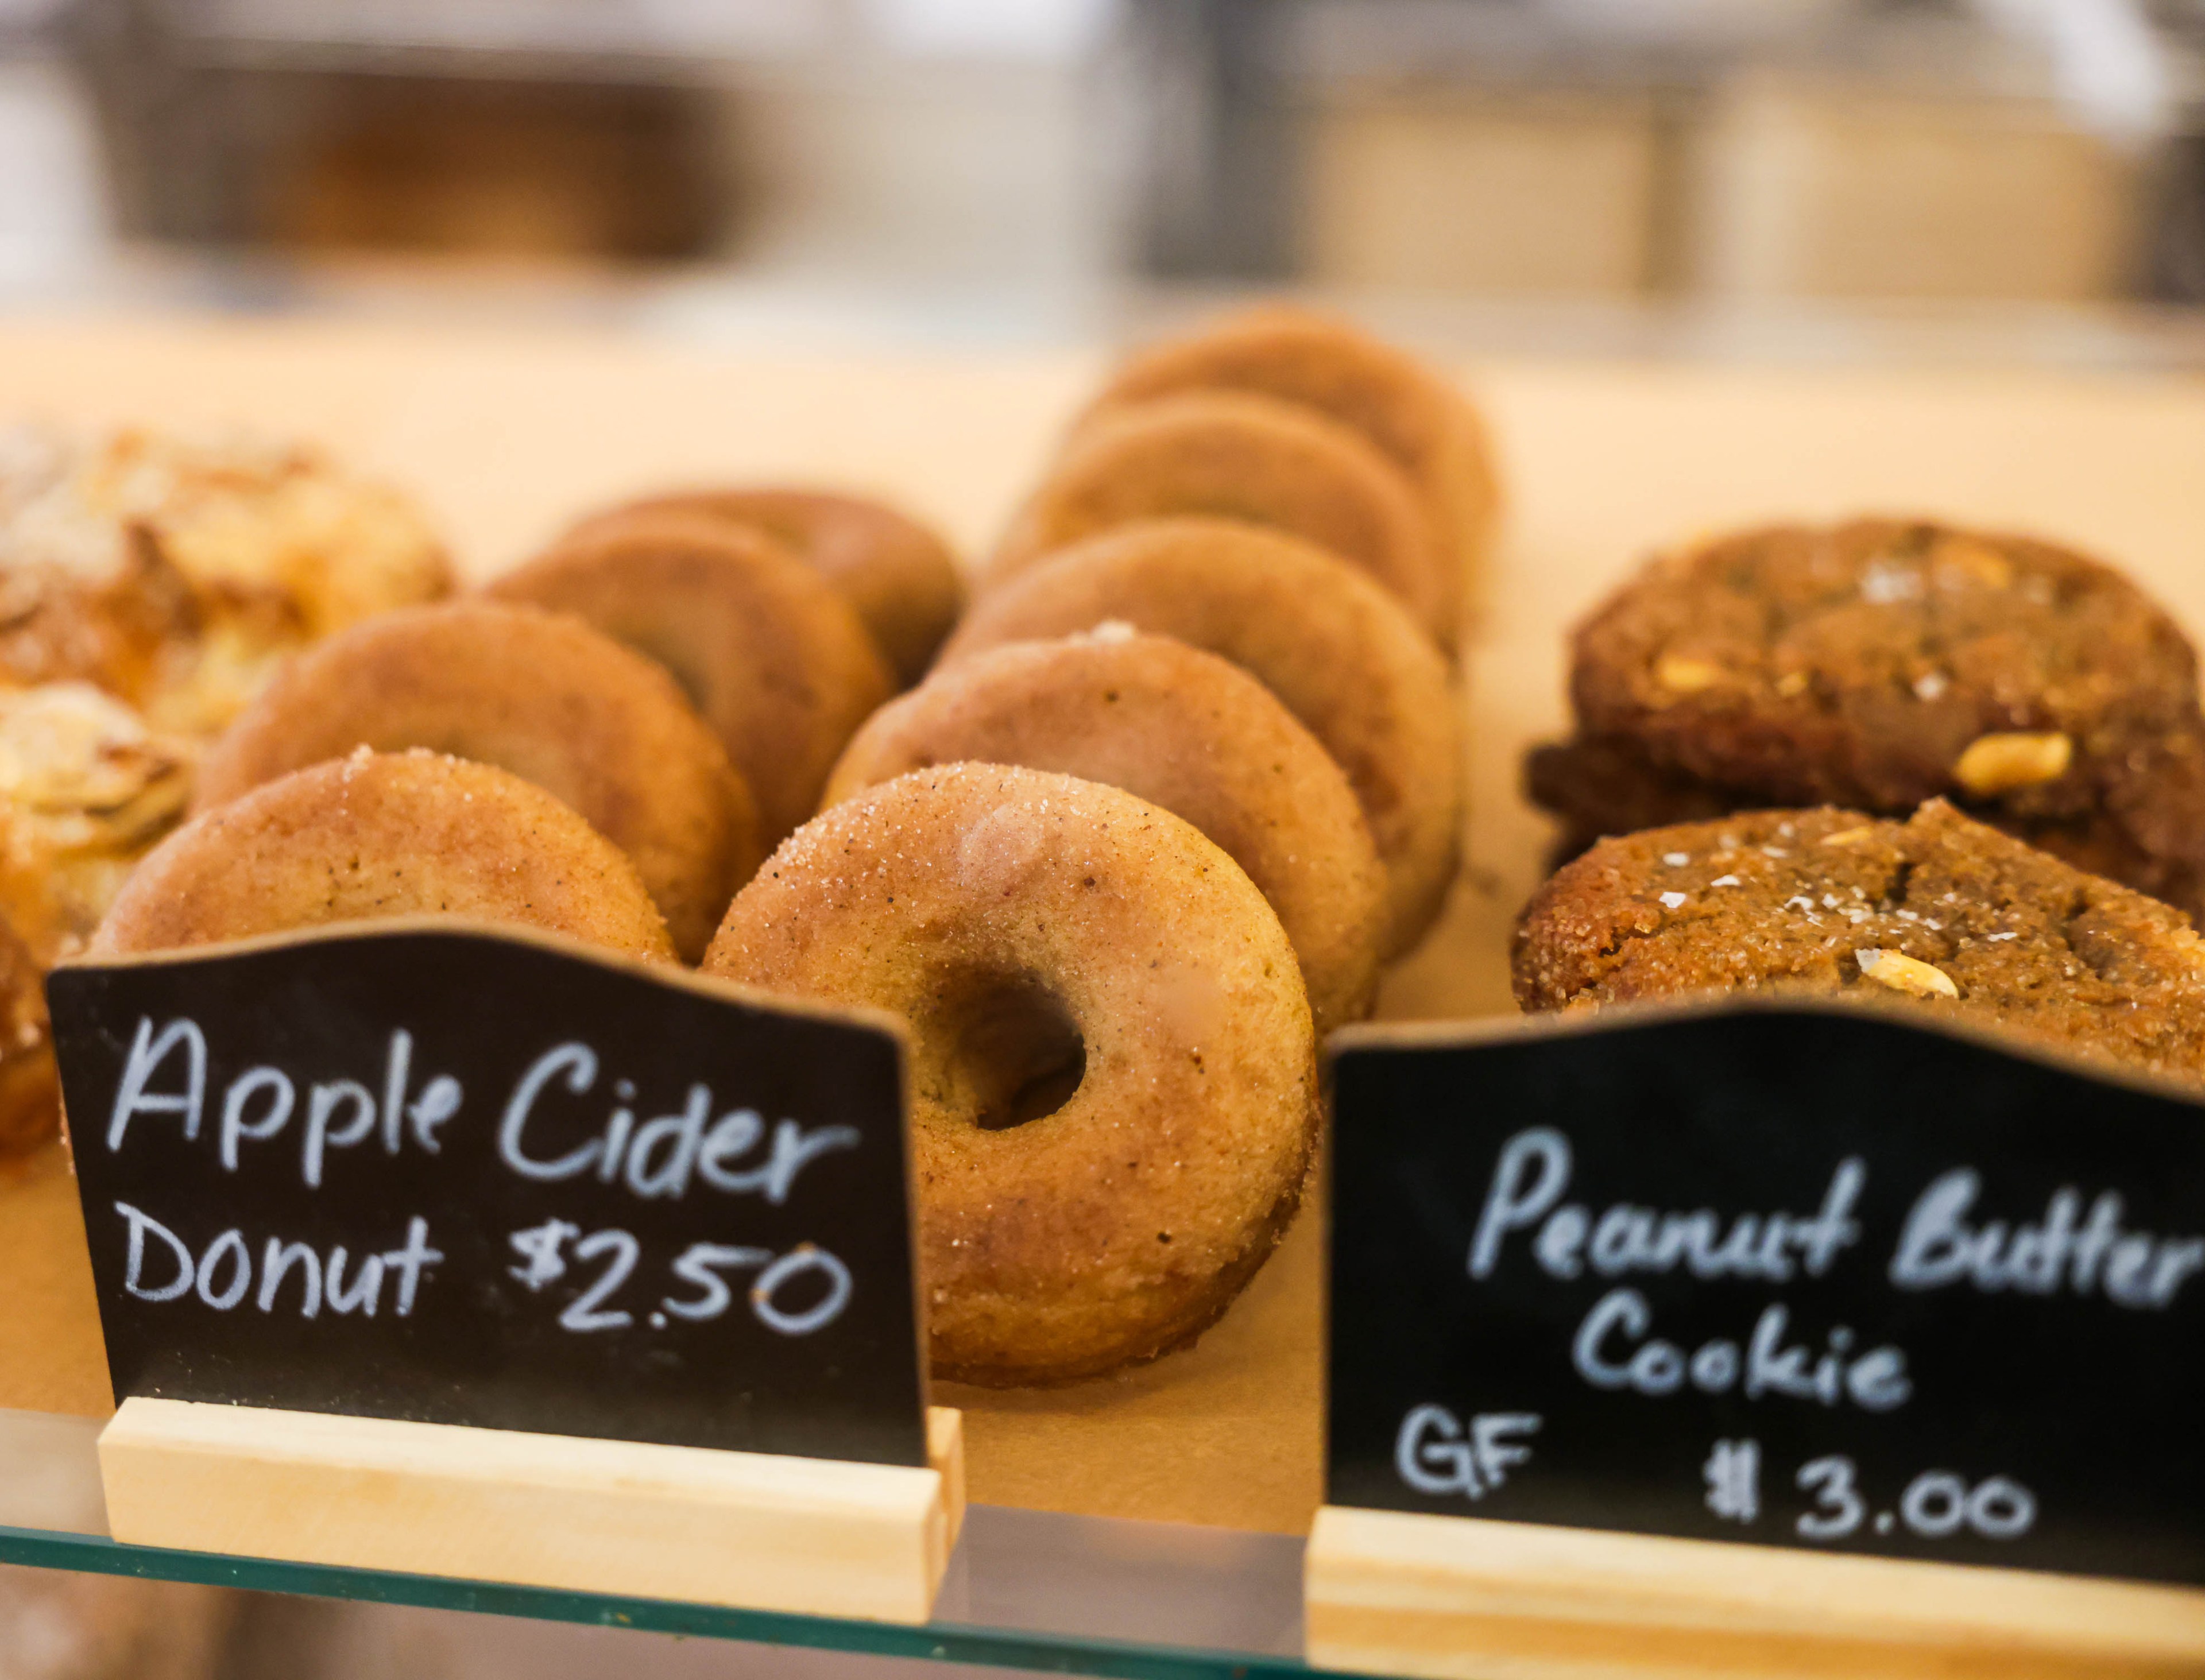 Apple cider donuts next to peanut butter cookies with prices on small chalkboard signs.